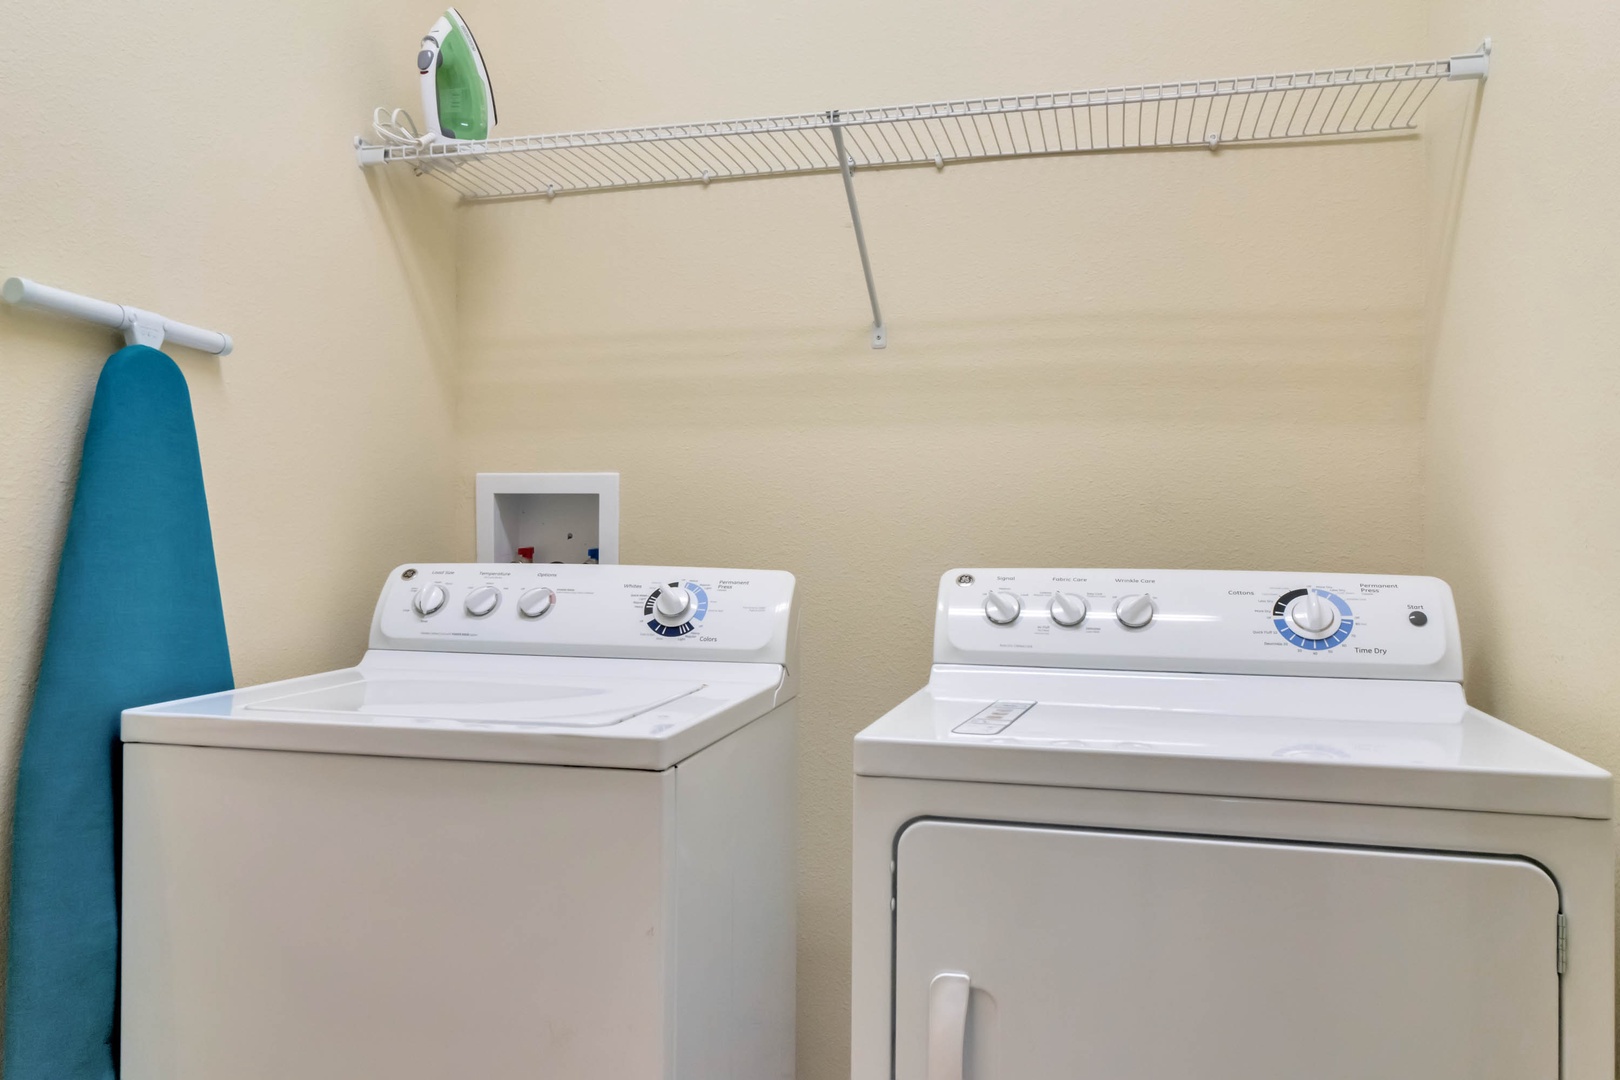 Washer area